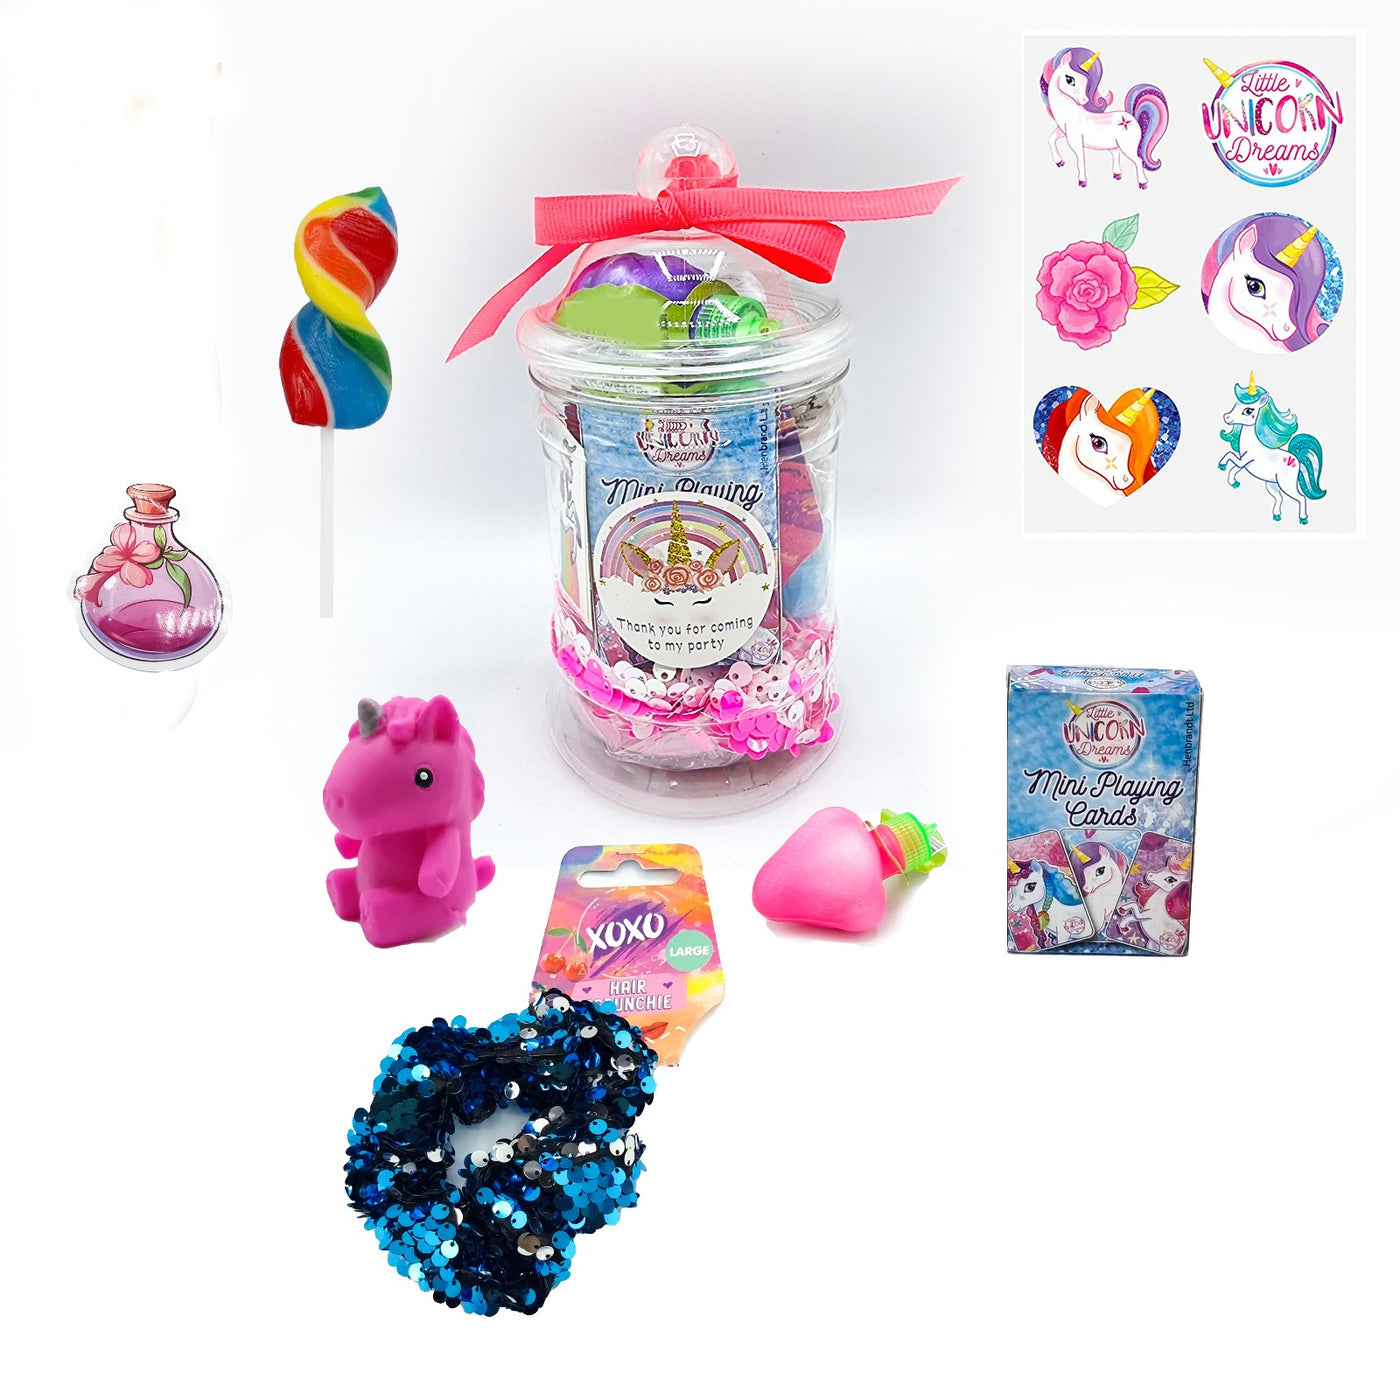 Girl's Luxury Pre Filled Birthday Unicorn Goody Bags In Vintage Jars With Toys And Sweets, Unicorn Party Favours.